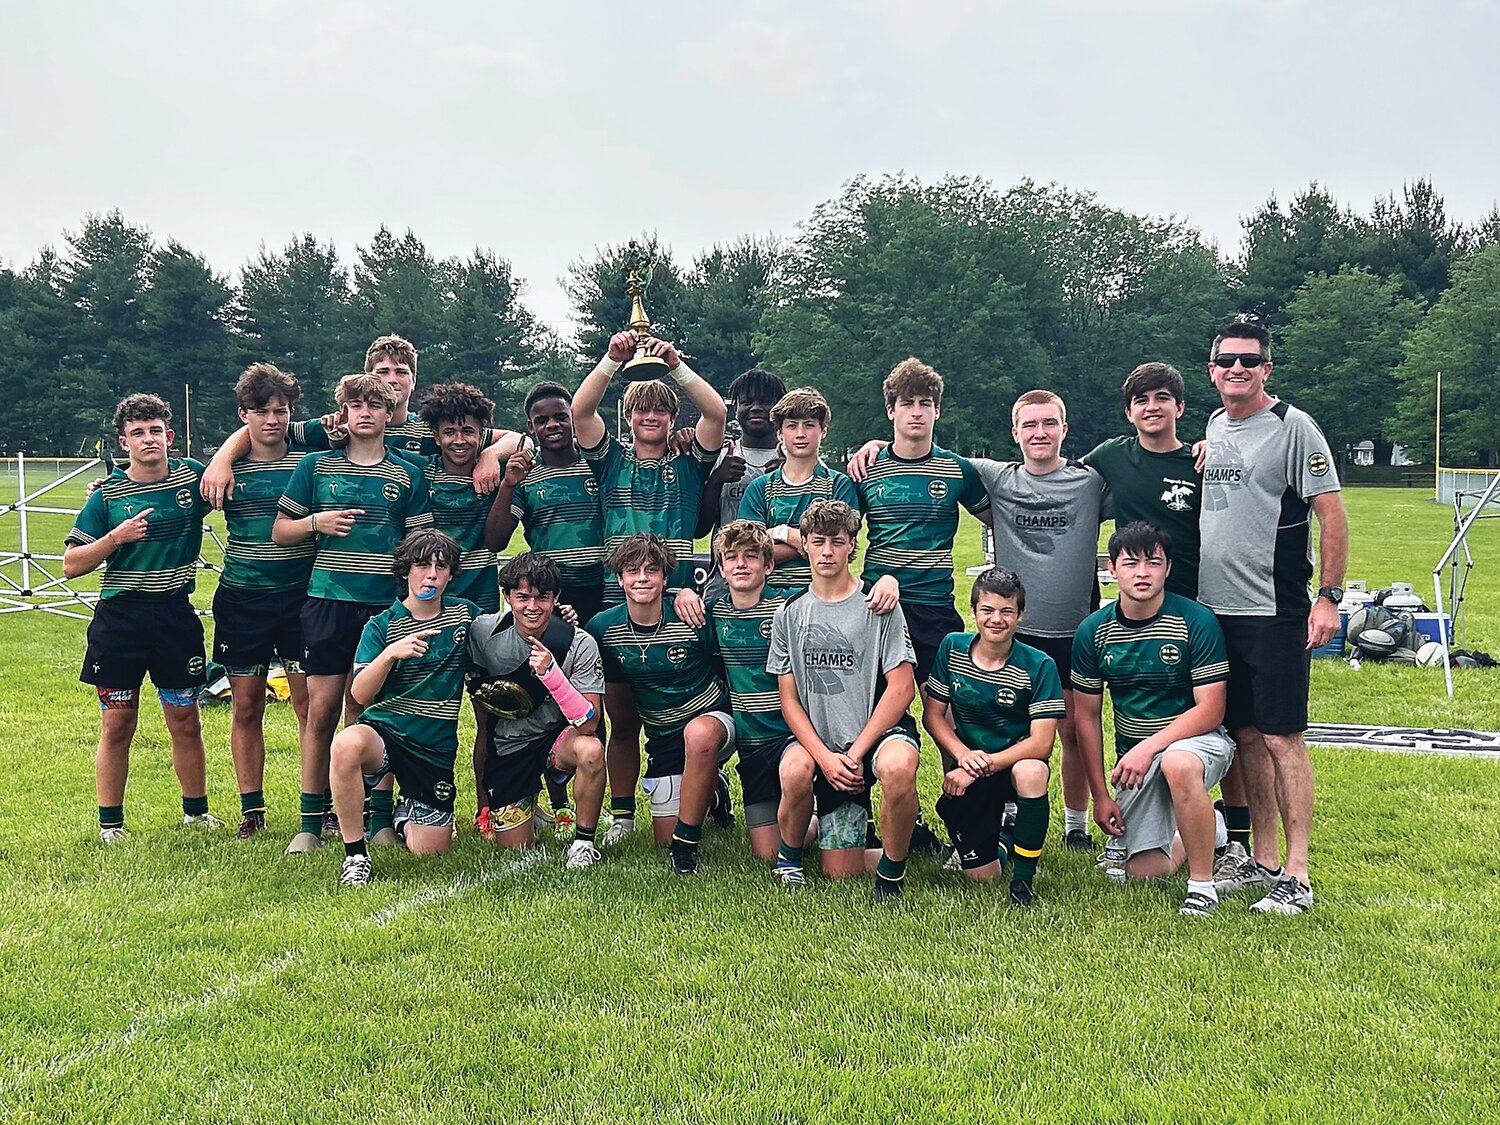 Team Joey, one of two Doylestown Rugby Academy junior boys teams in the Dragon’s Breath 7s tournament, defeated Berks County 45-0 to claim the title June 17.